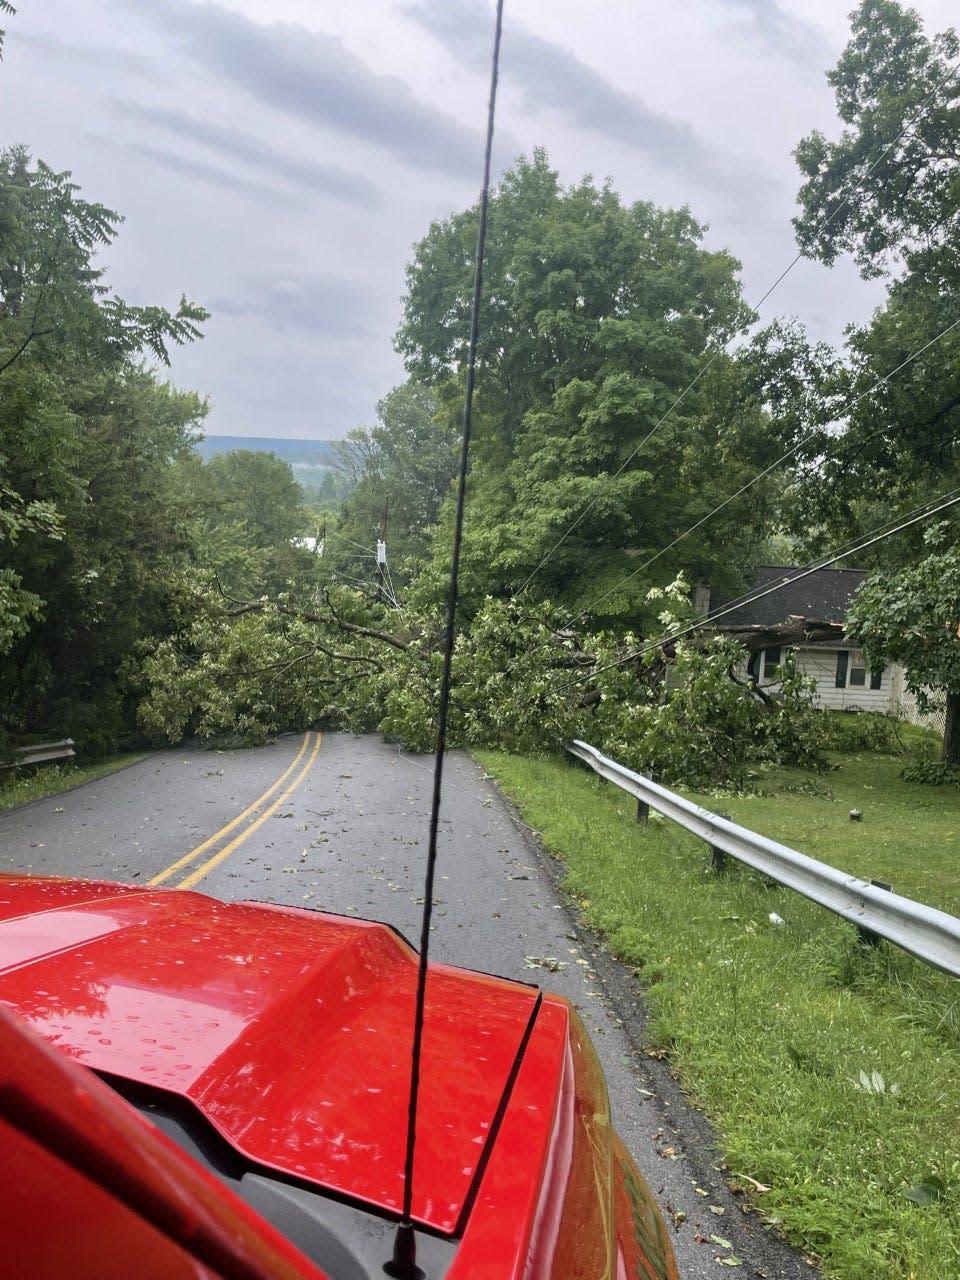 Reader Sue Hunter submitted this photo of a downed tree across Neyhart Road in Snydersville after a storm hit the area on July 12, 2022.